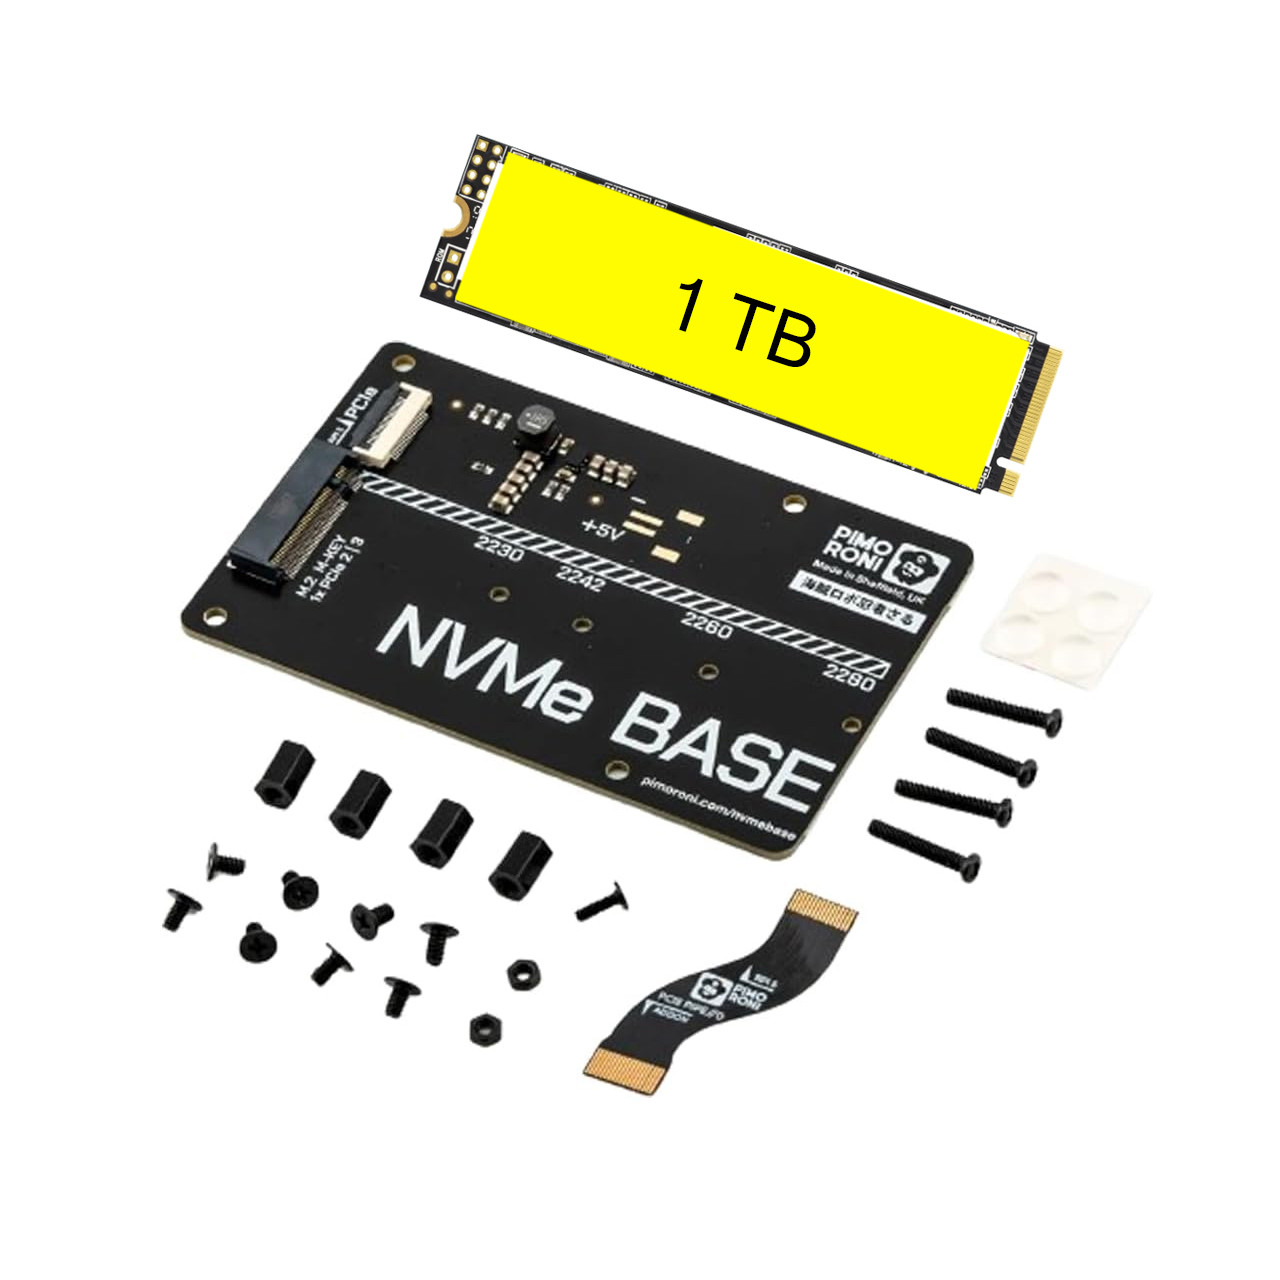 NVMe Base M.2 HAT PCIe Extension w/ 1 TB M.2 2280 Internal Solid State Drive SSD